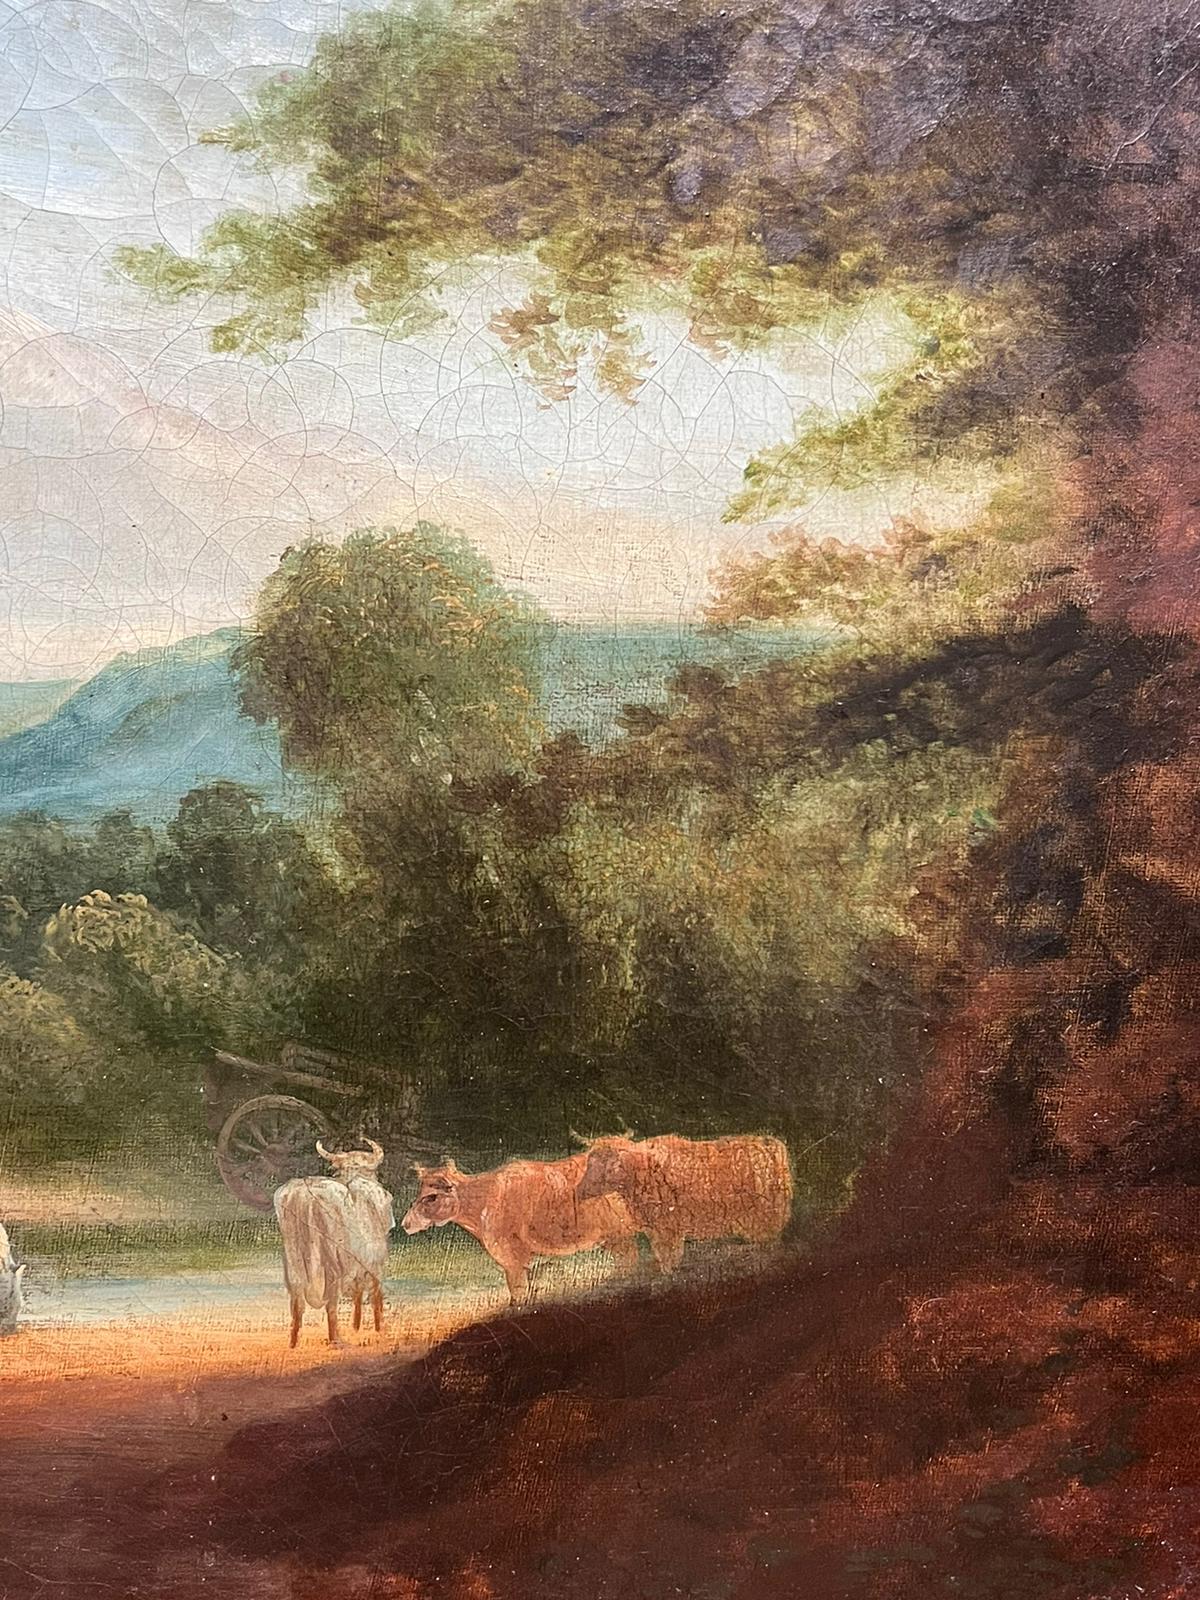 The Victorian Farmyard
British School, circa 1830
oil on canvas, unframed
canvas: 34 x 48 inches
provenance: private collection, England
condition: good and sound condition, though with some scuffing to the outer edges and old paint loss to those